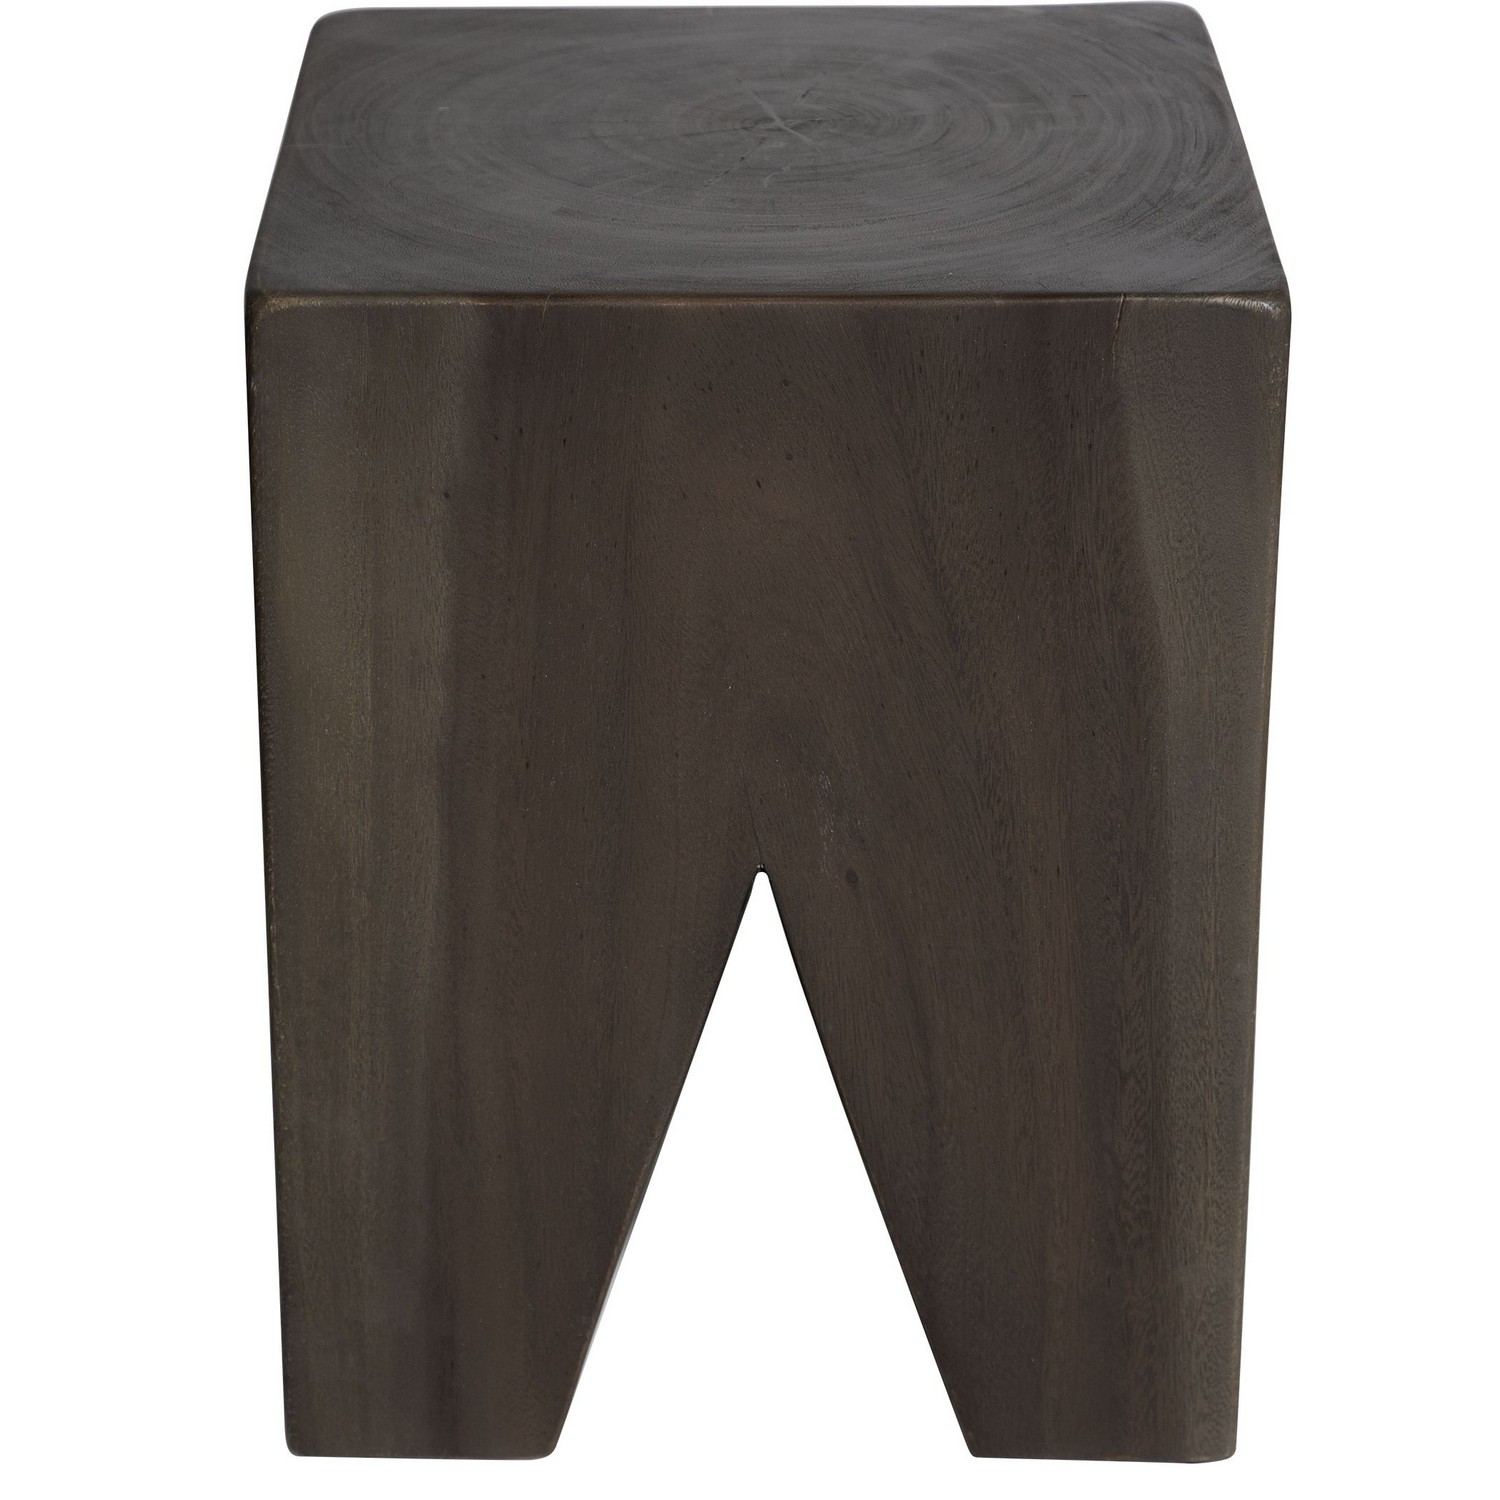 Uttermost Armin Solid Wood Accent Stool